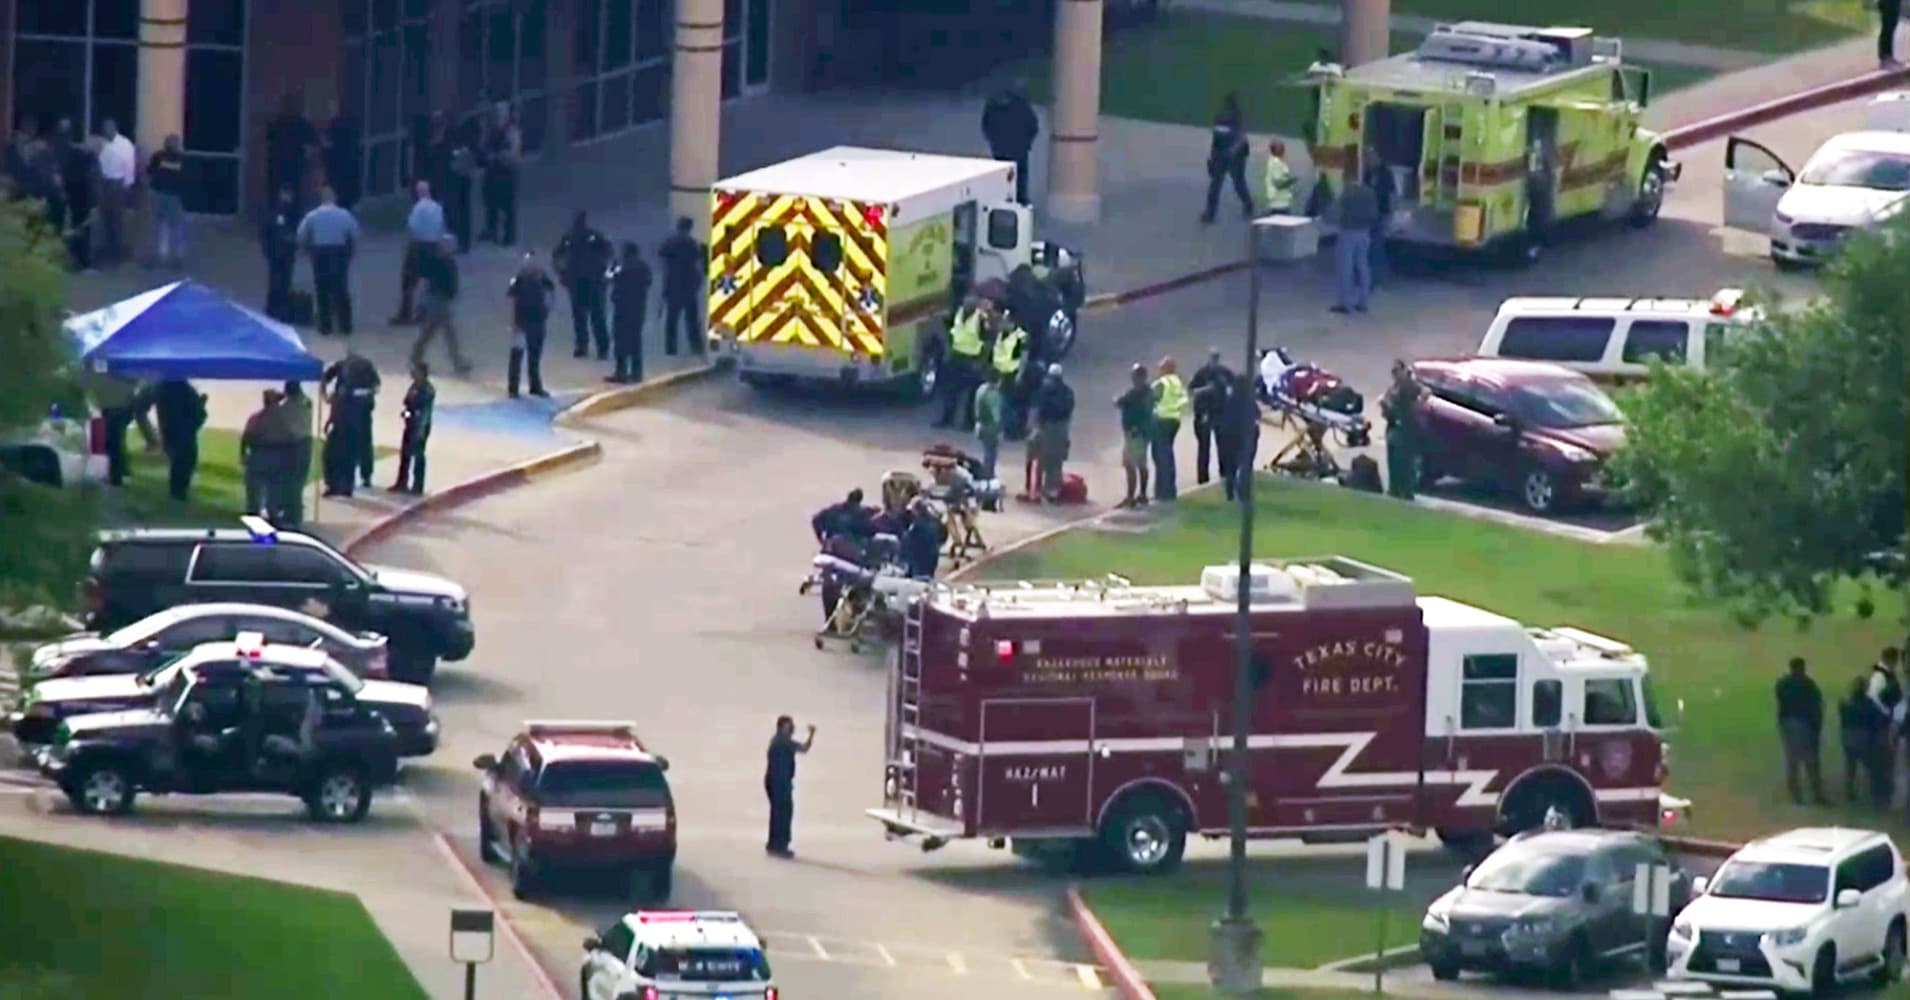 The family of suspected Houston school shooter express shock over rampage